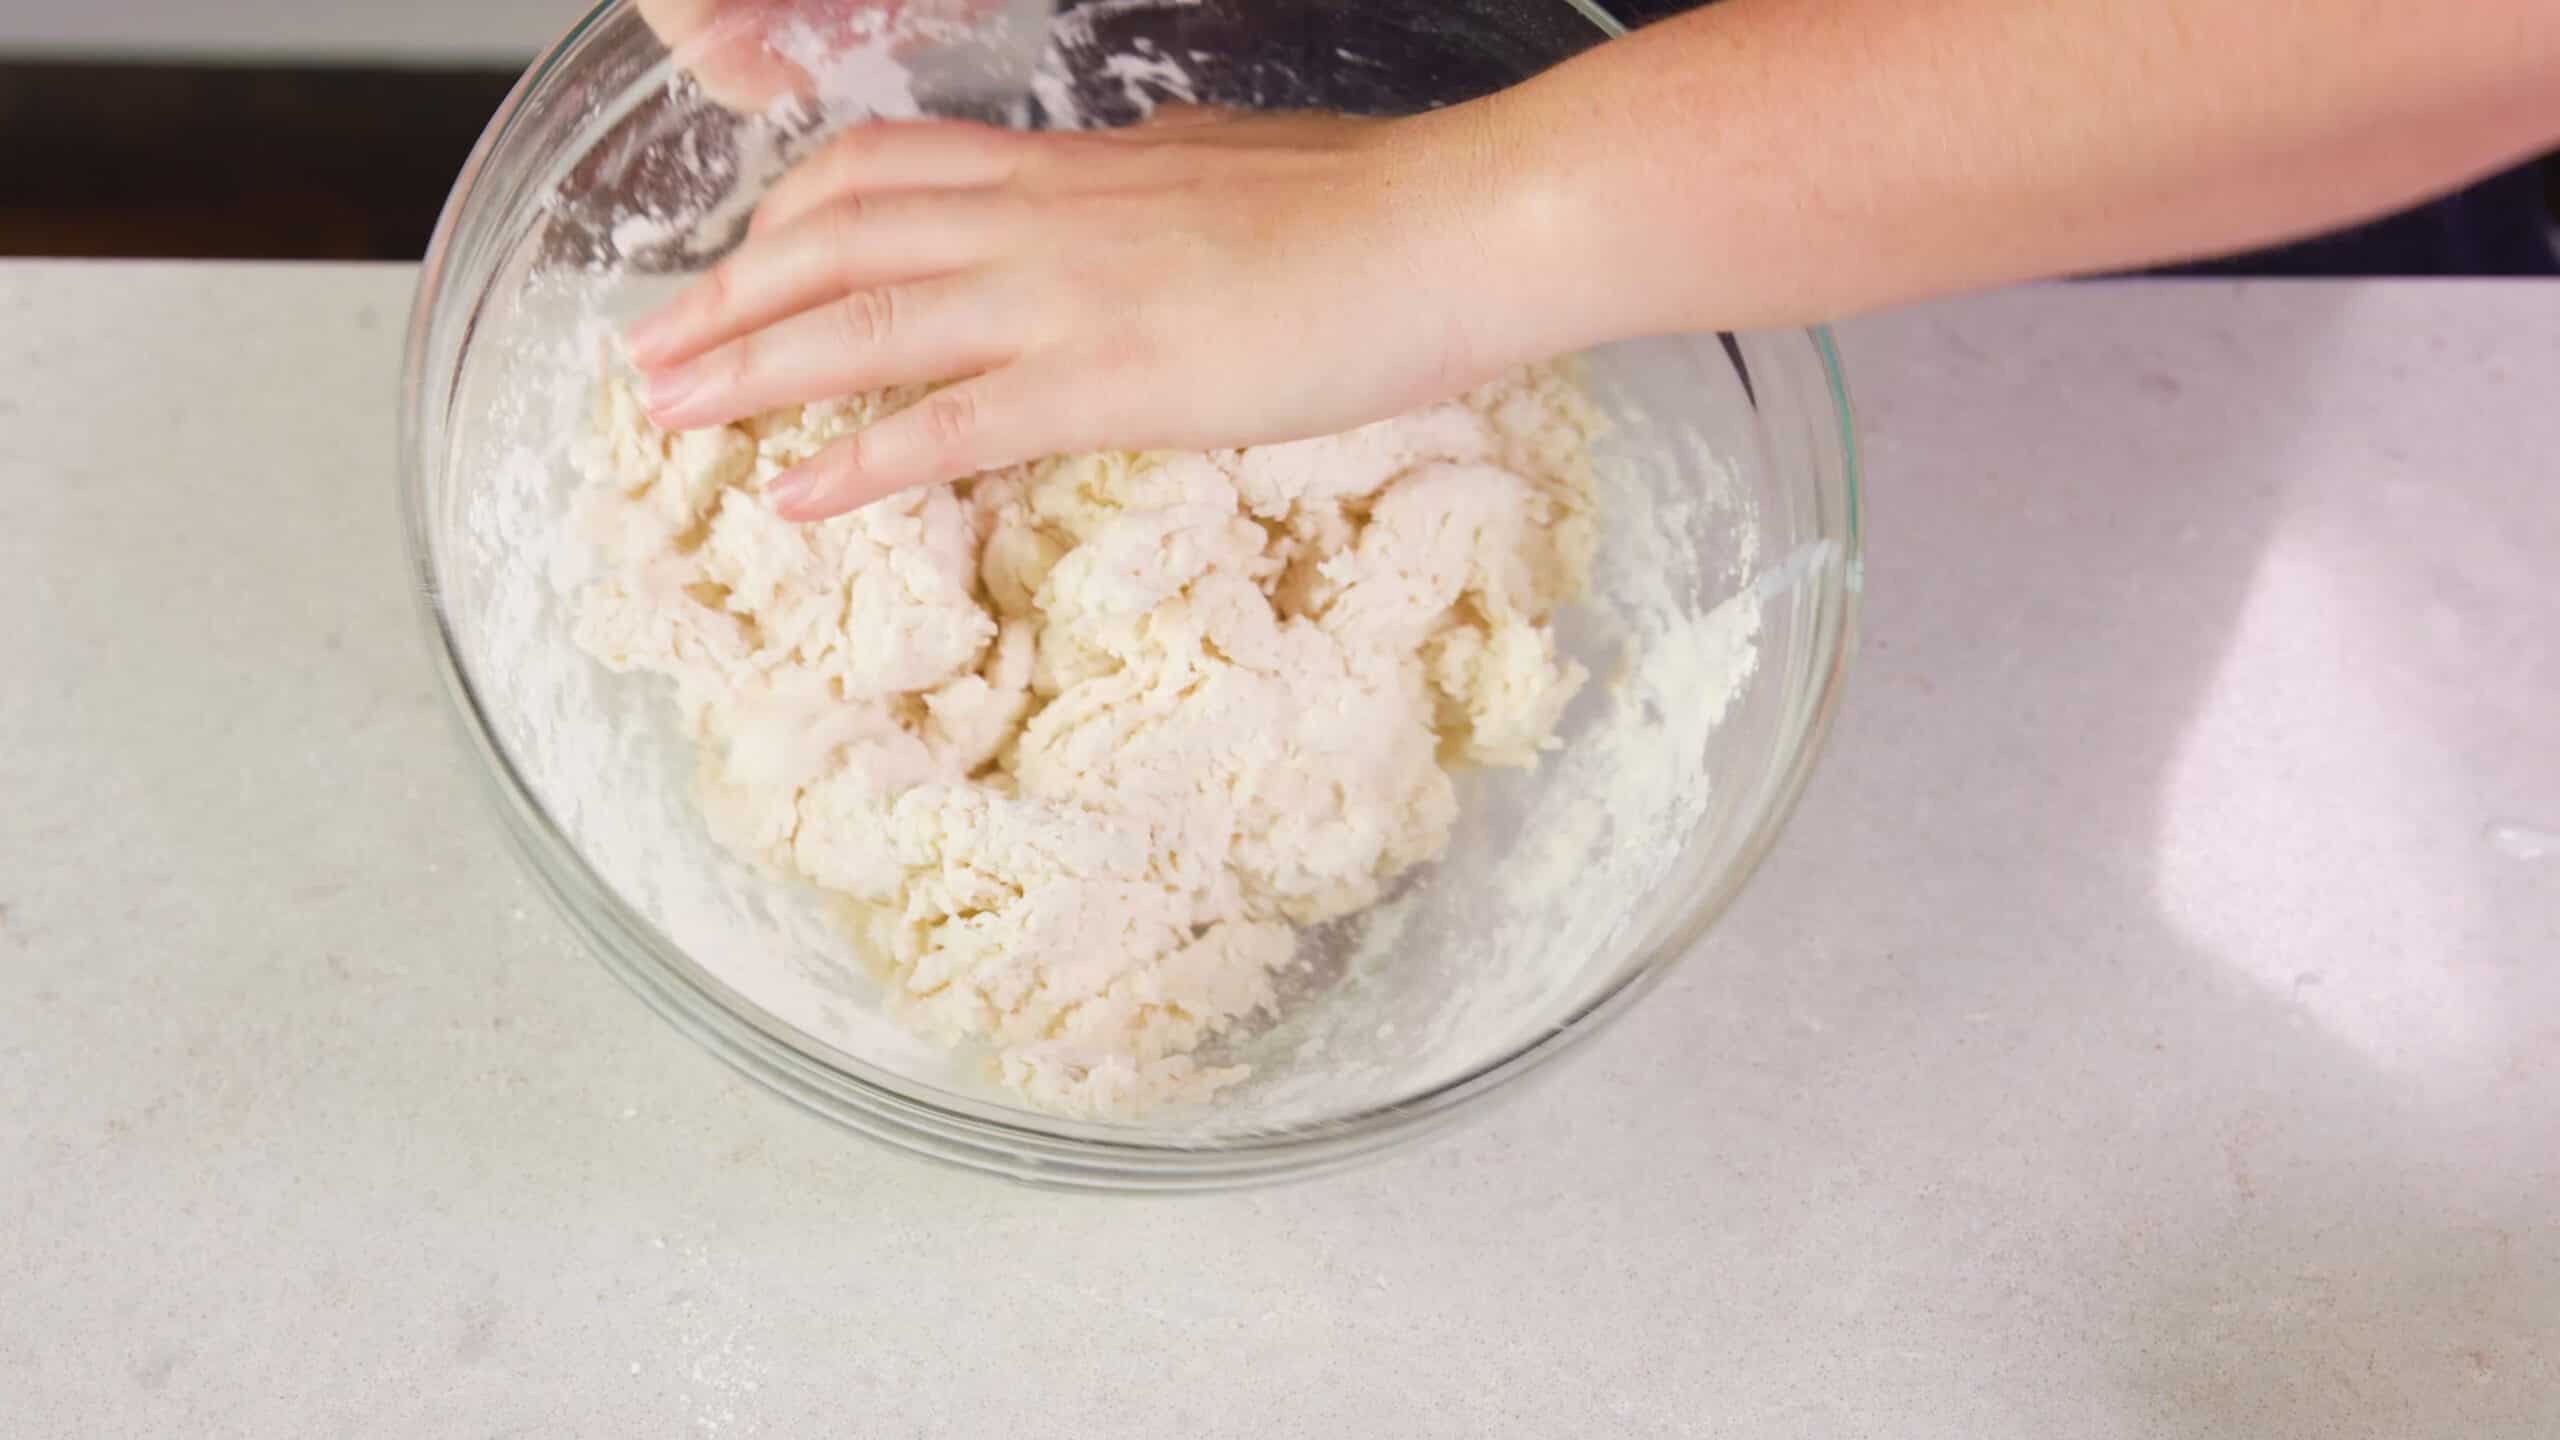 A mixing bowl filled with buttermilk biscuit dough is tipped ready to transfer the dough onto a clean countertop to knead.